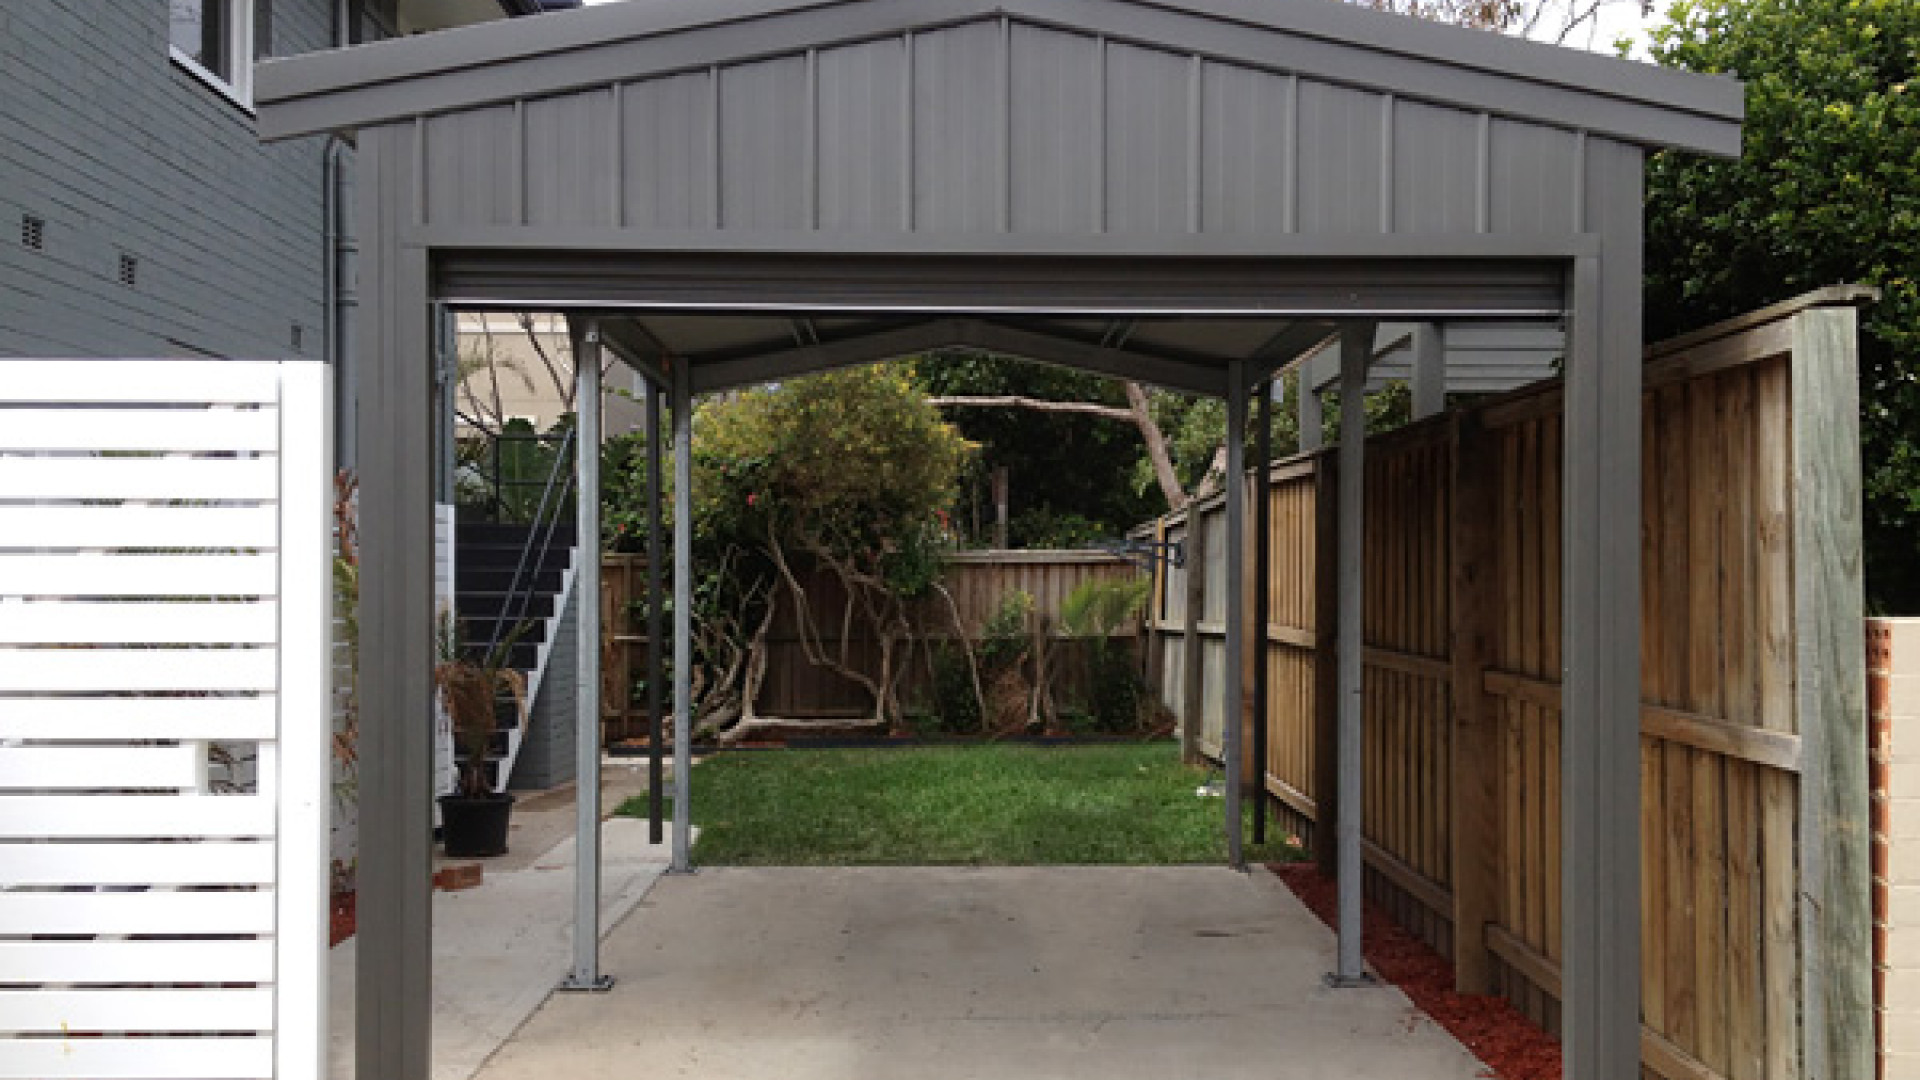 Carports Contemporary Meaning Will A Carport Add Value To Your Home Lb Supplies Modern Contemporary Carport Designs Architecturein Lollidy Cady